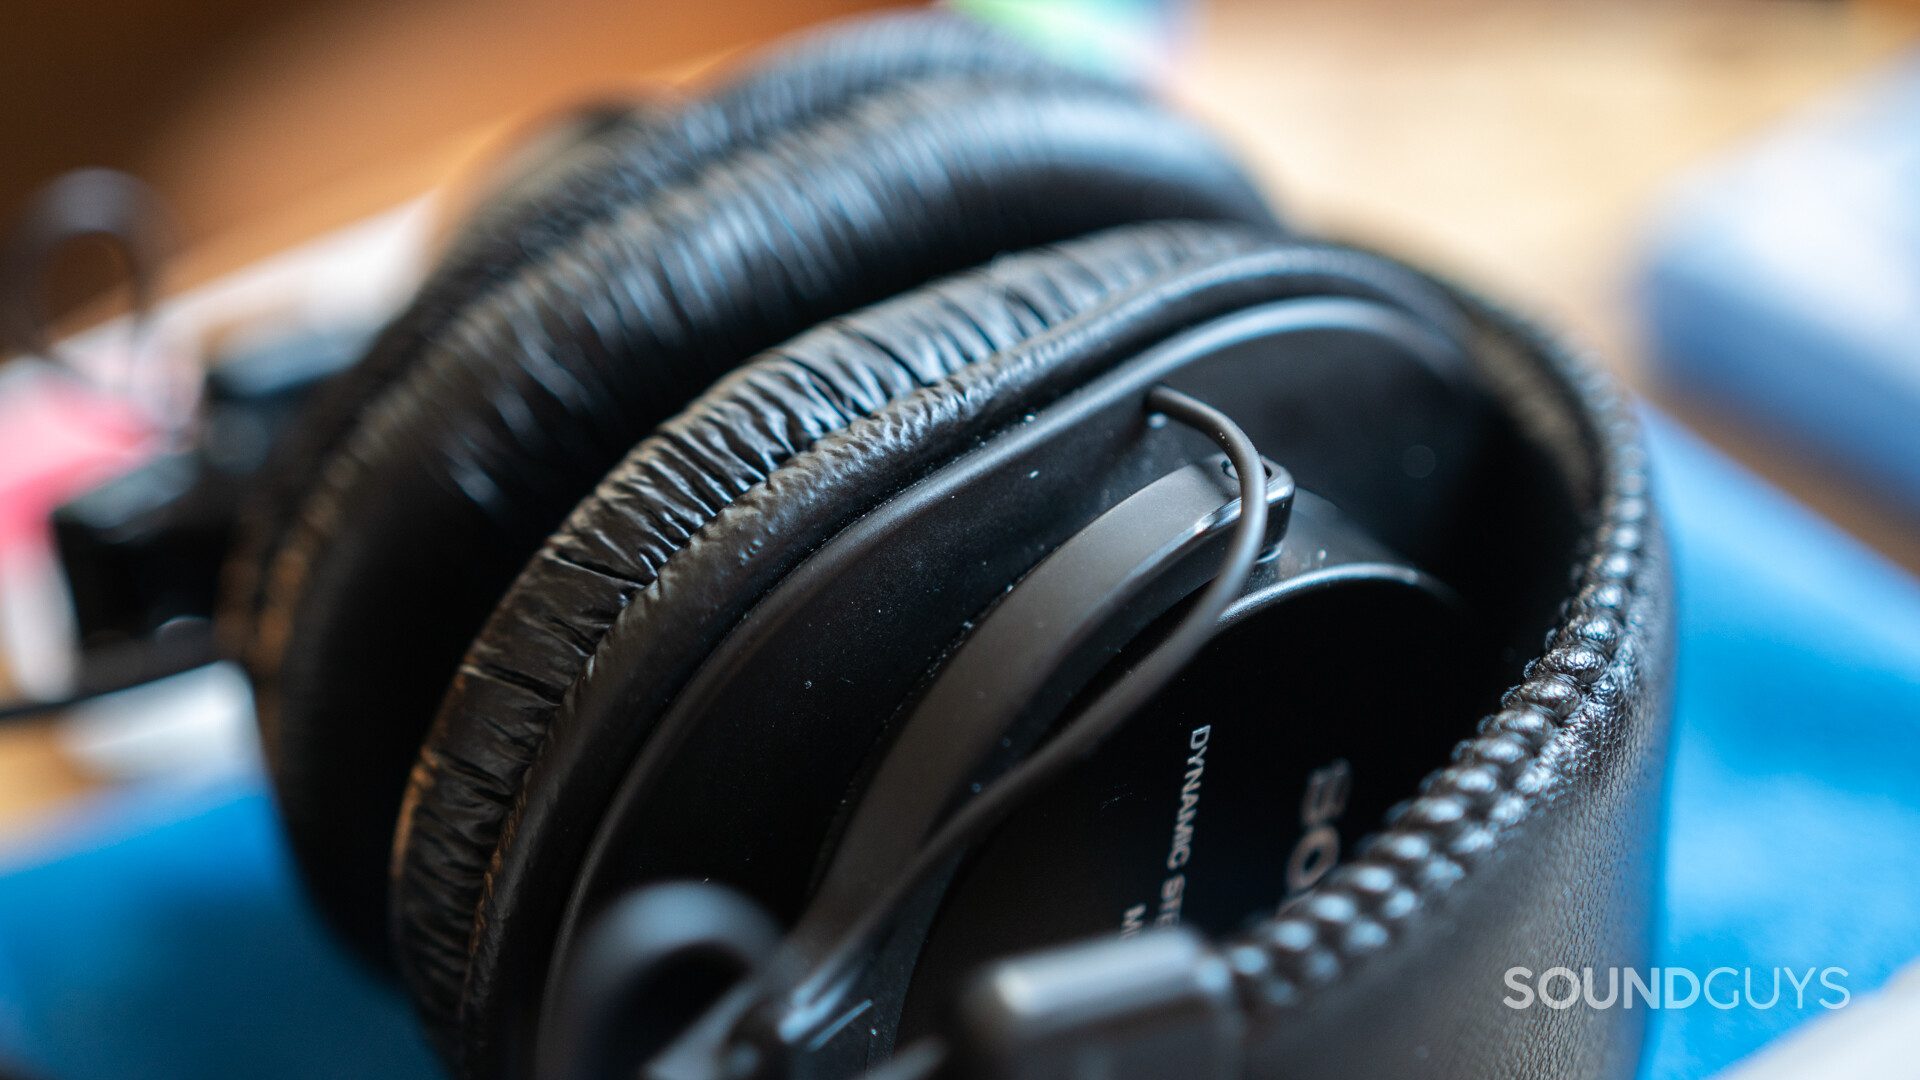 Close-up of Sony MDR-7506 headphones with specs of dust in it